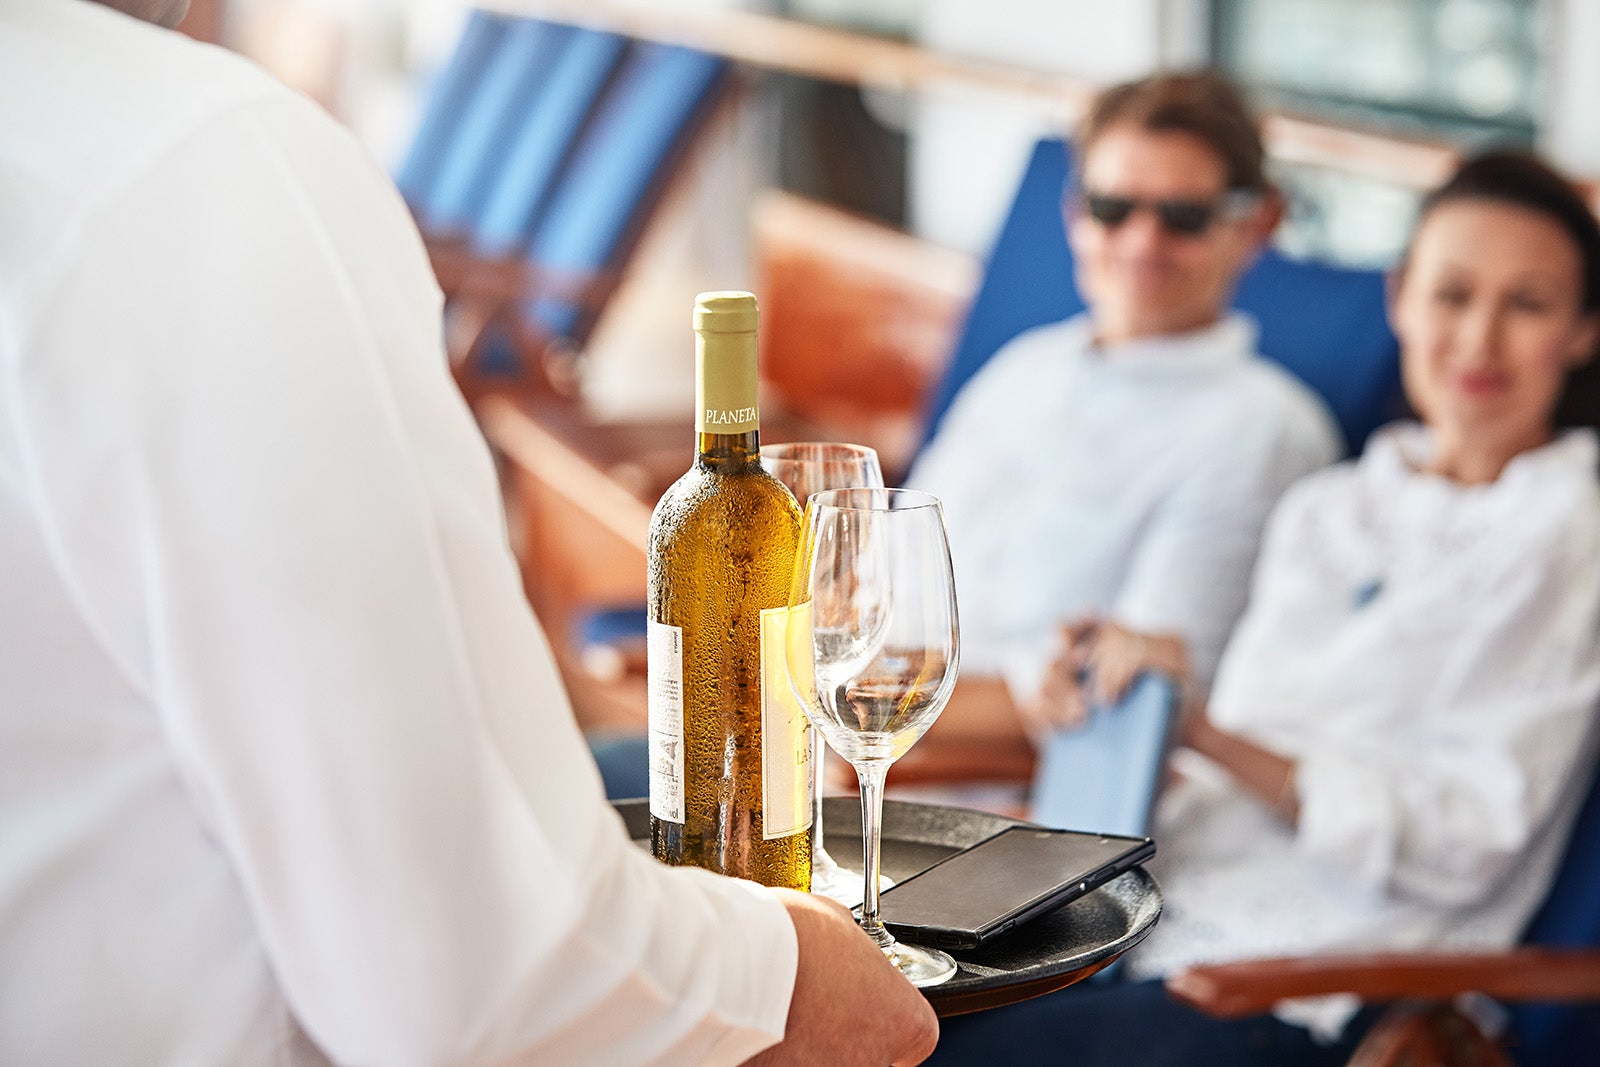 Crew member bringing bottle of white wine to couple on cruise ship deck